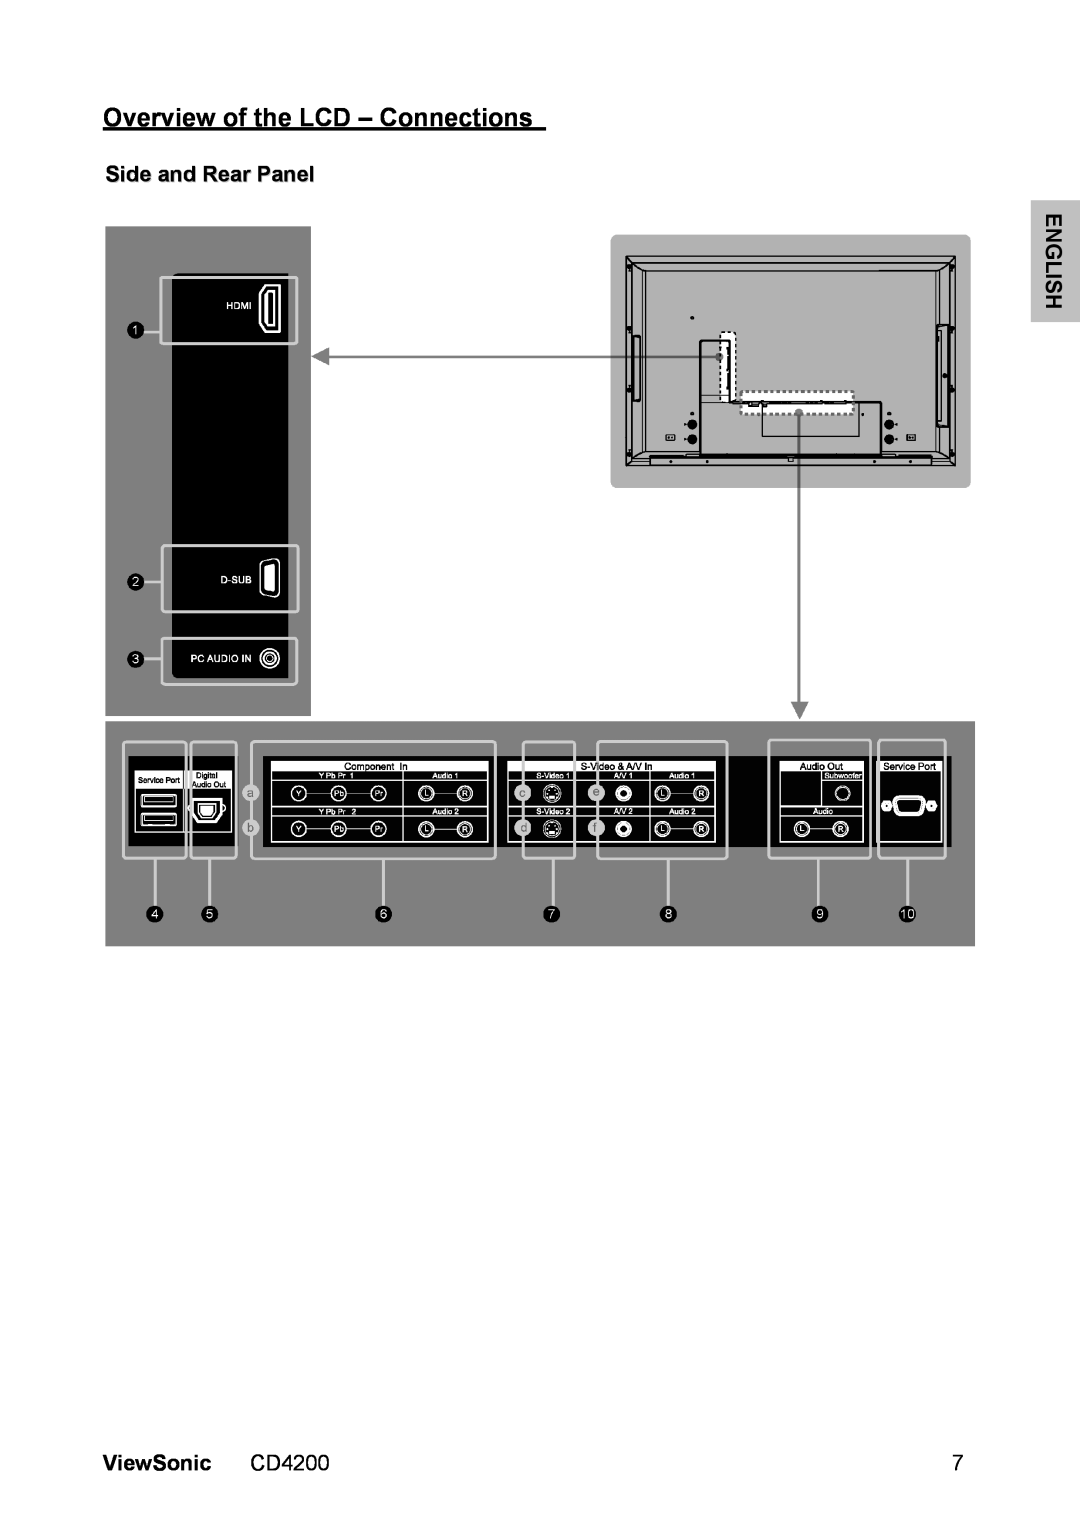 ViewSonic manual Overview of the LCD - Connections, Side and Rear Panel ENGLISH, ViewSonic CD4200 